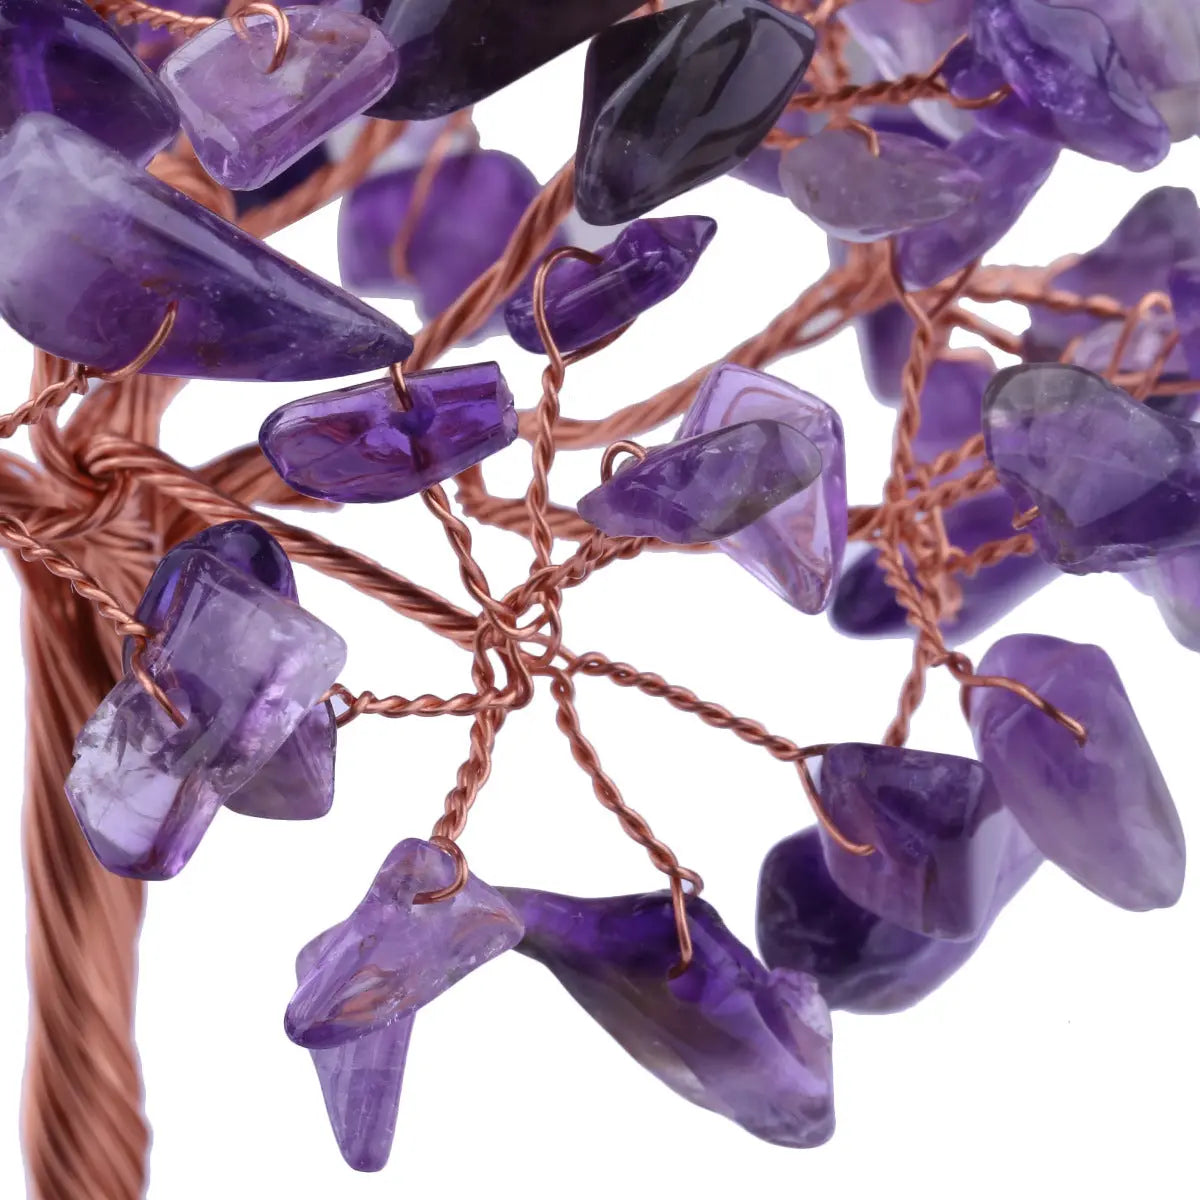 Spreading Tree Of Life, Agate Slices Base, Amethyst Crystal Tree, Feng Shui Lucky Money Gemstone Tree Healing Crystal Home